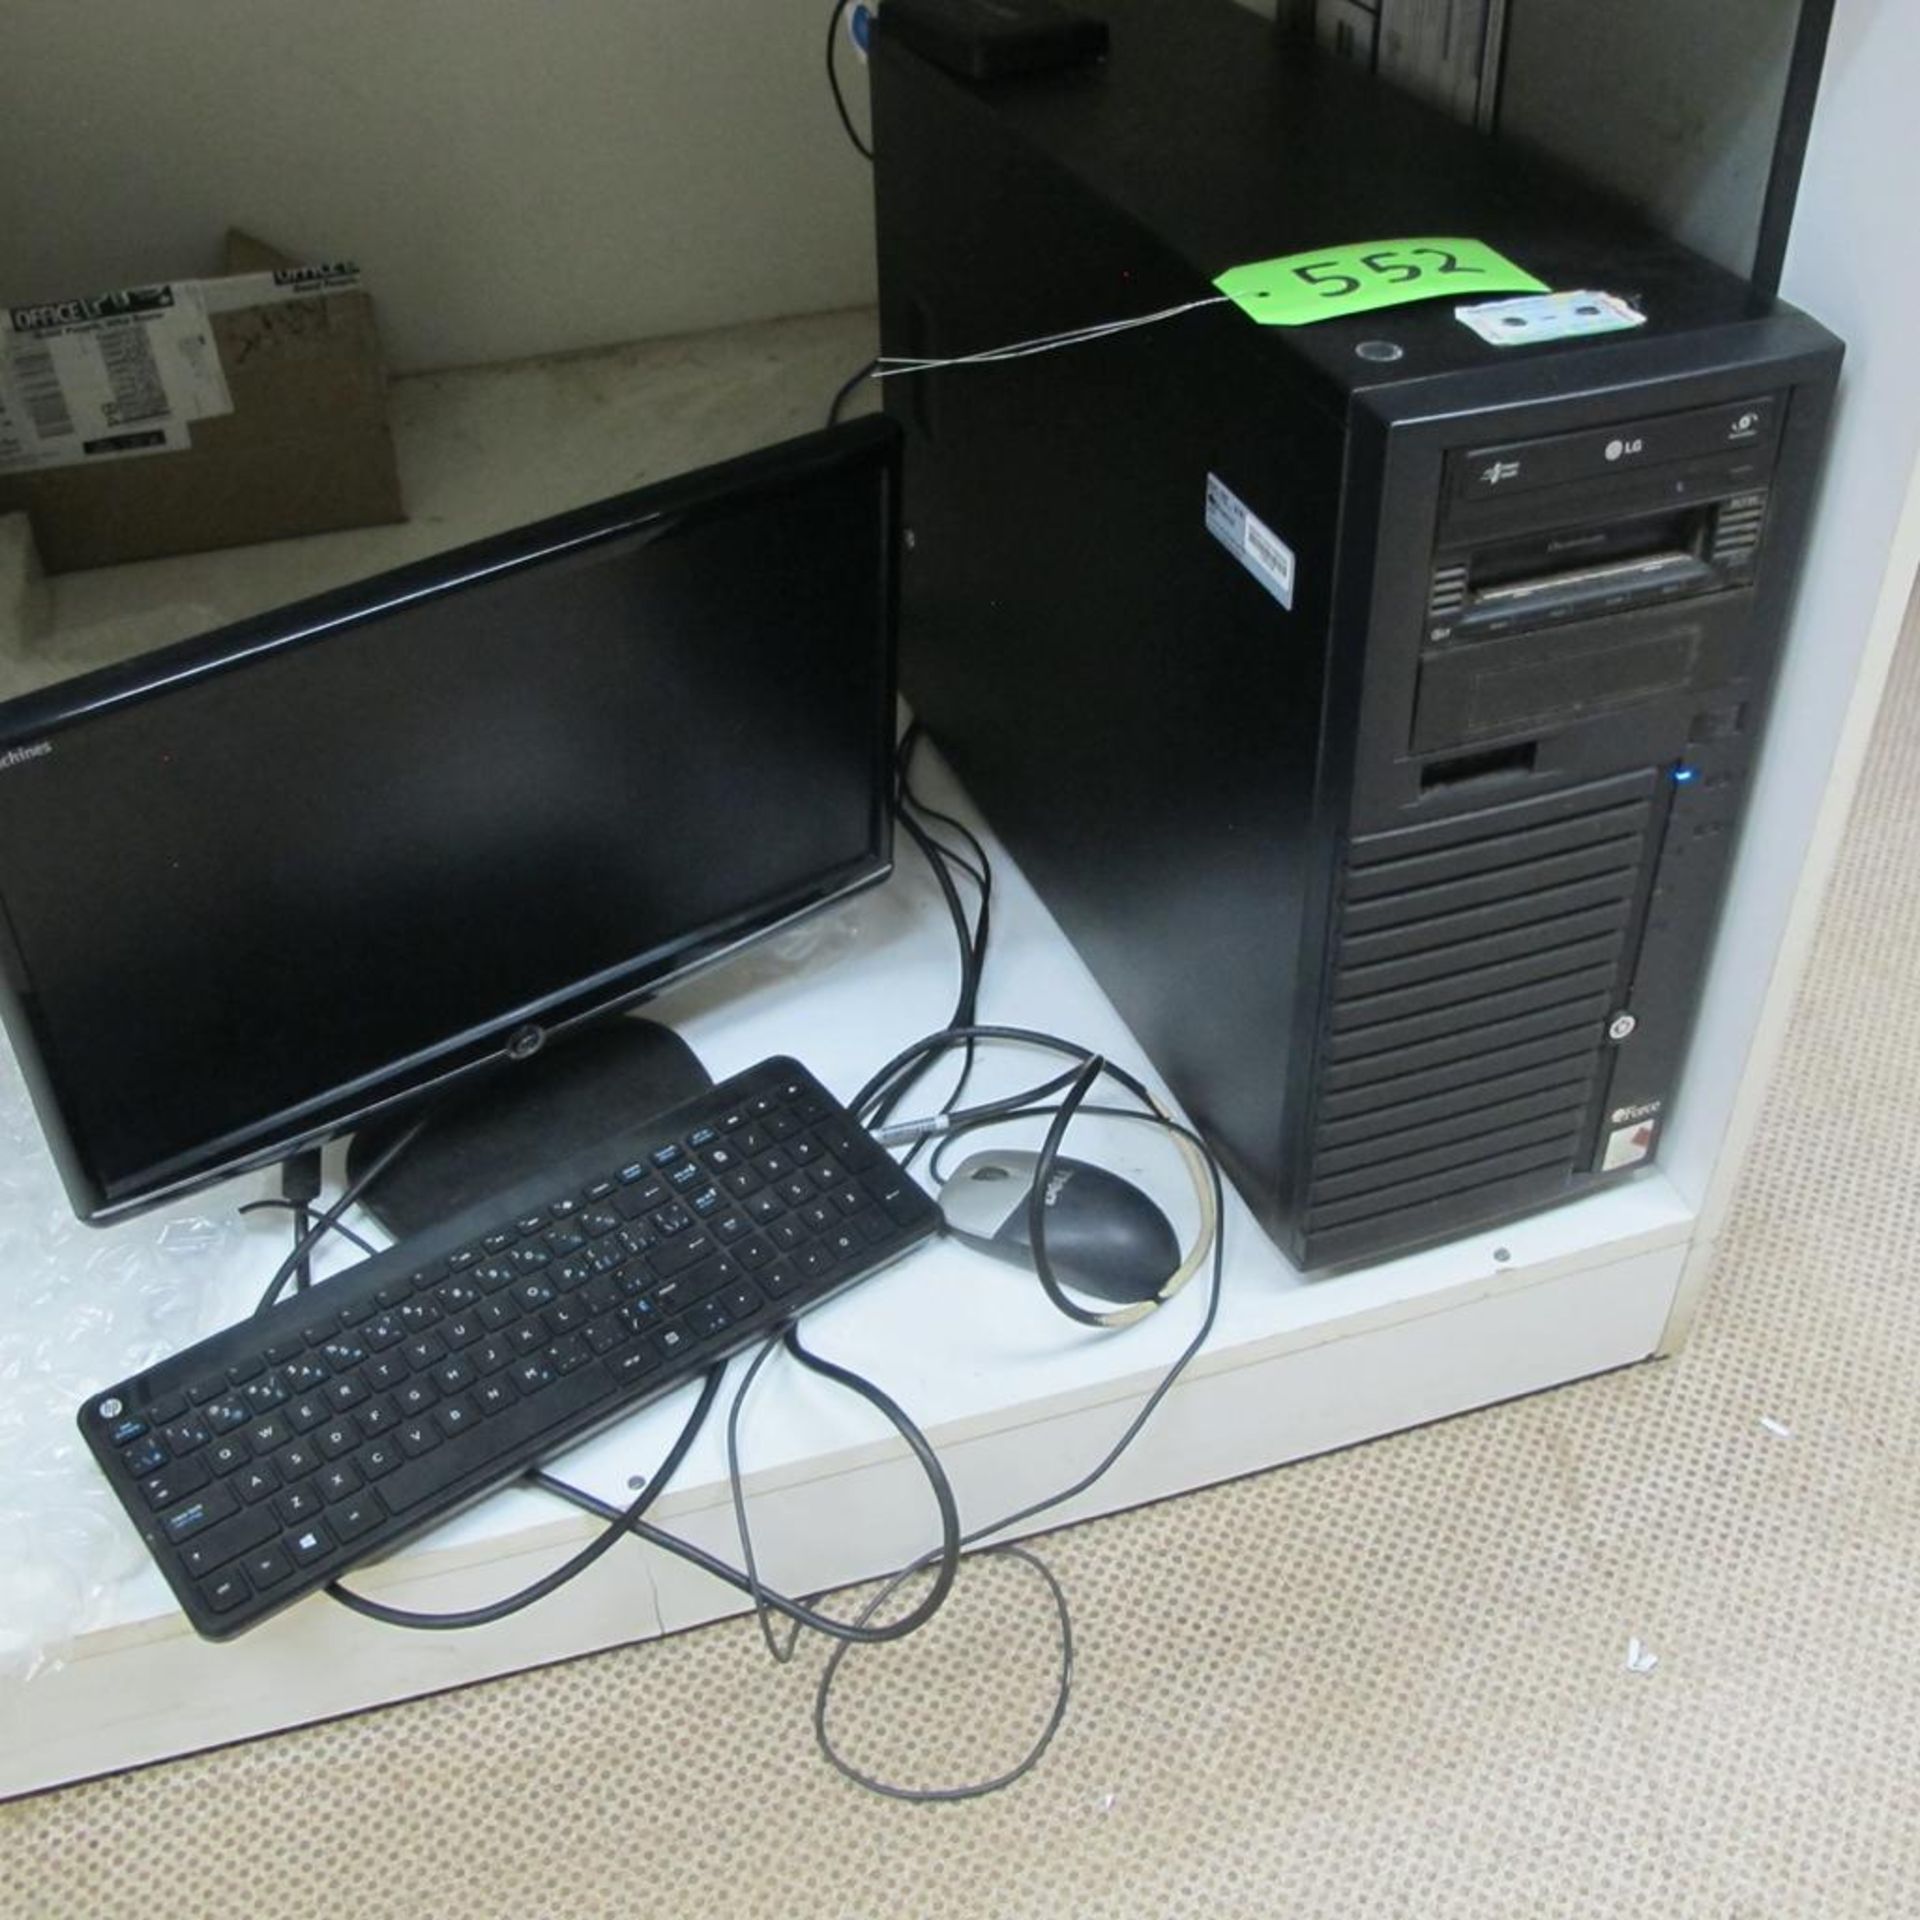 FORCE TOUCH COMPUTER SERVER W/MONITOR, KEYBOARD AND MOUSE (MAIN BLDG)